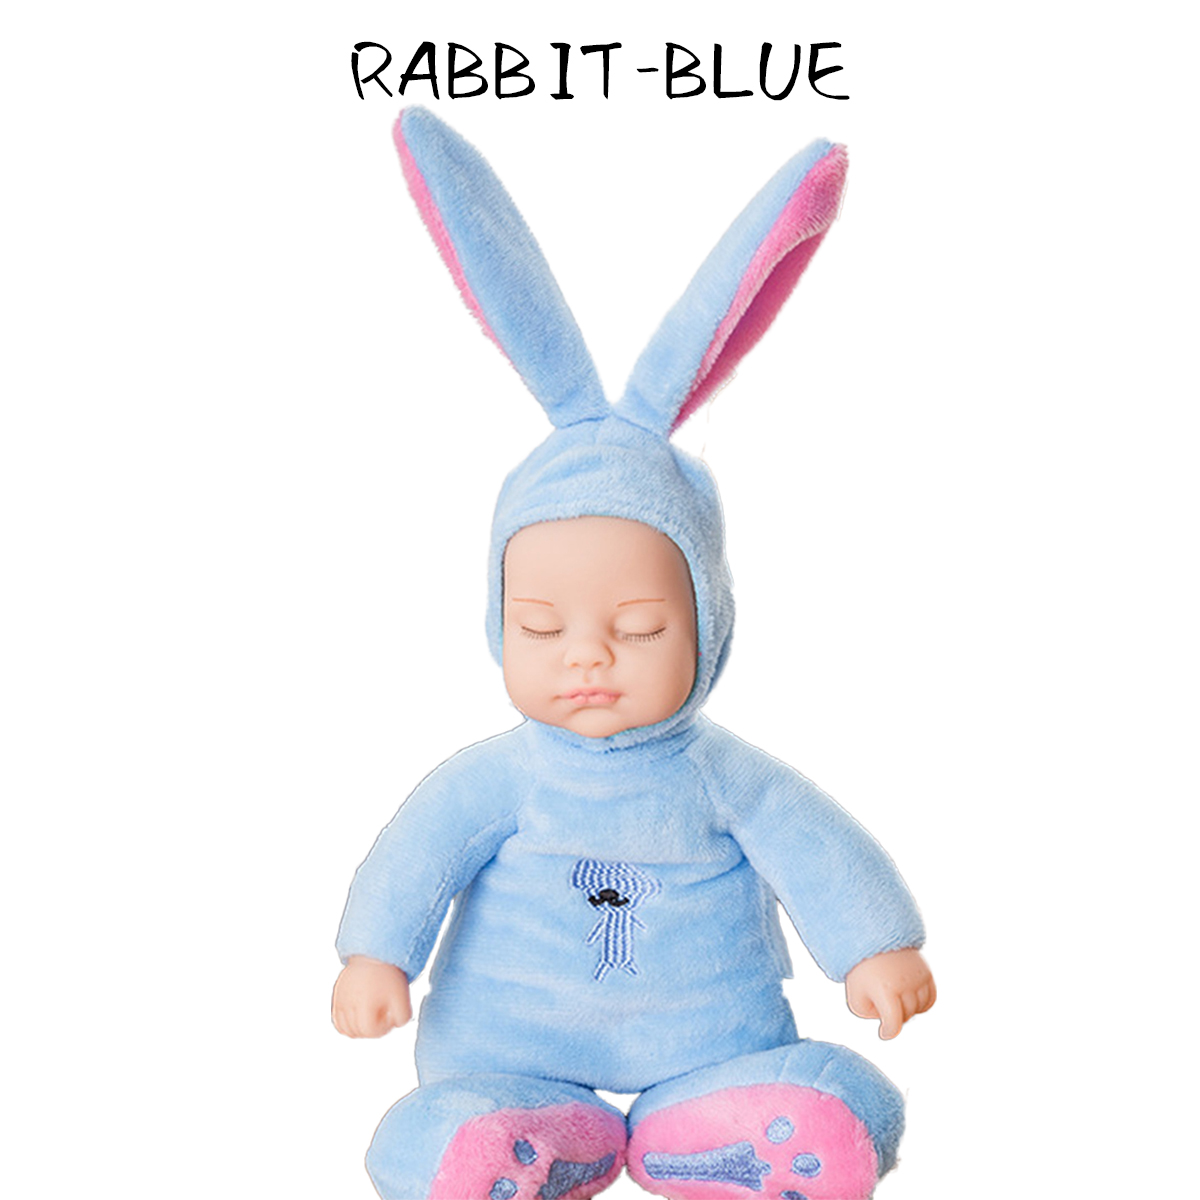 23CM-Soft-Silicone-Vinyl-Lifelike-Realistic-Reborn-Cute-Bear-Rabbit-Doll-Toy-with-Clothes-1722622-8